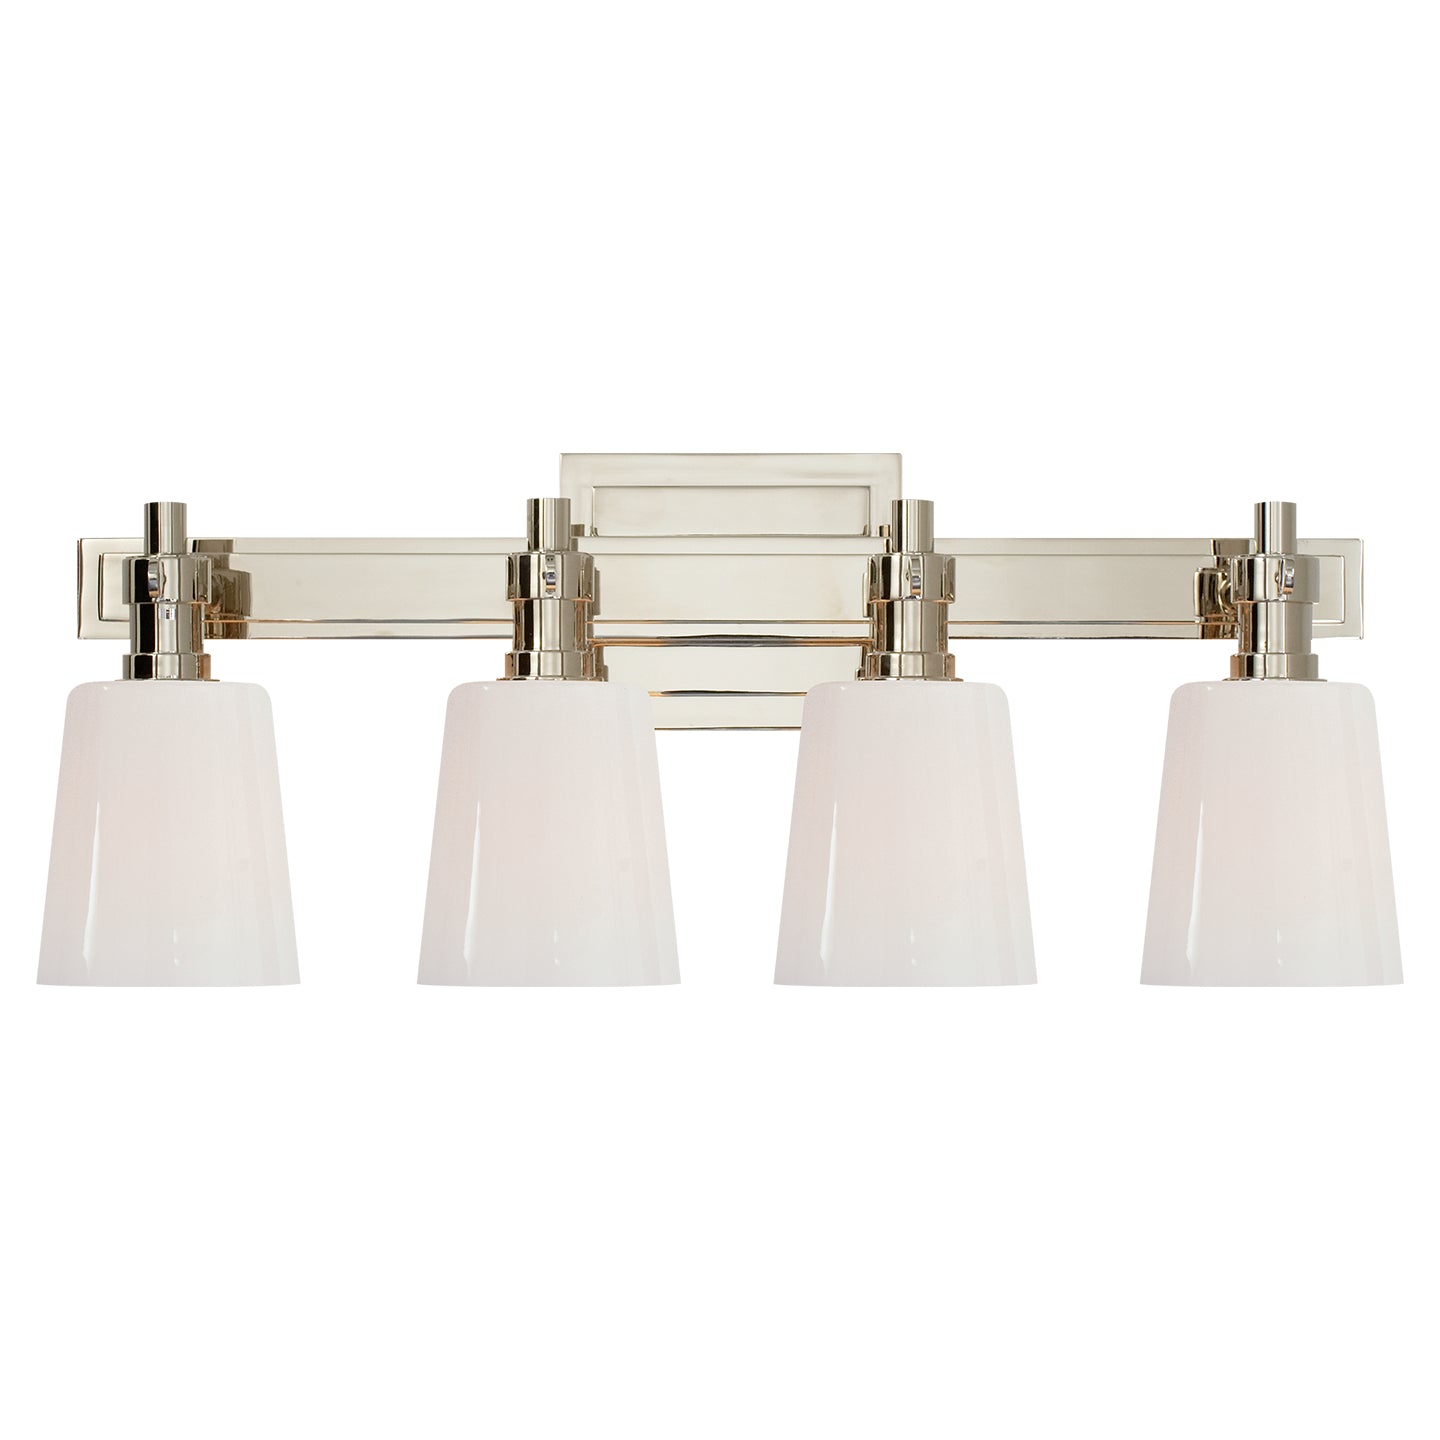 Load image into Gallery viewer, Visual Comfort Signature - TOB 2153PN-WG - Four Light Bath Sconce - Bryant Bath - Polished Nickel
